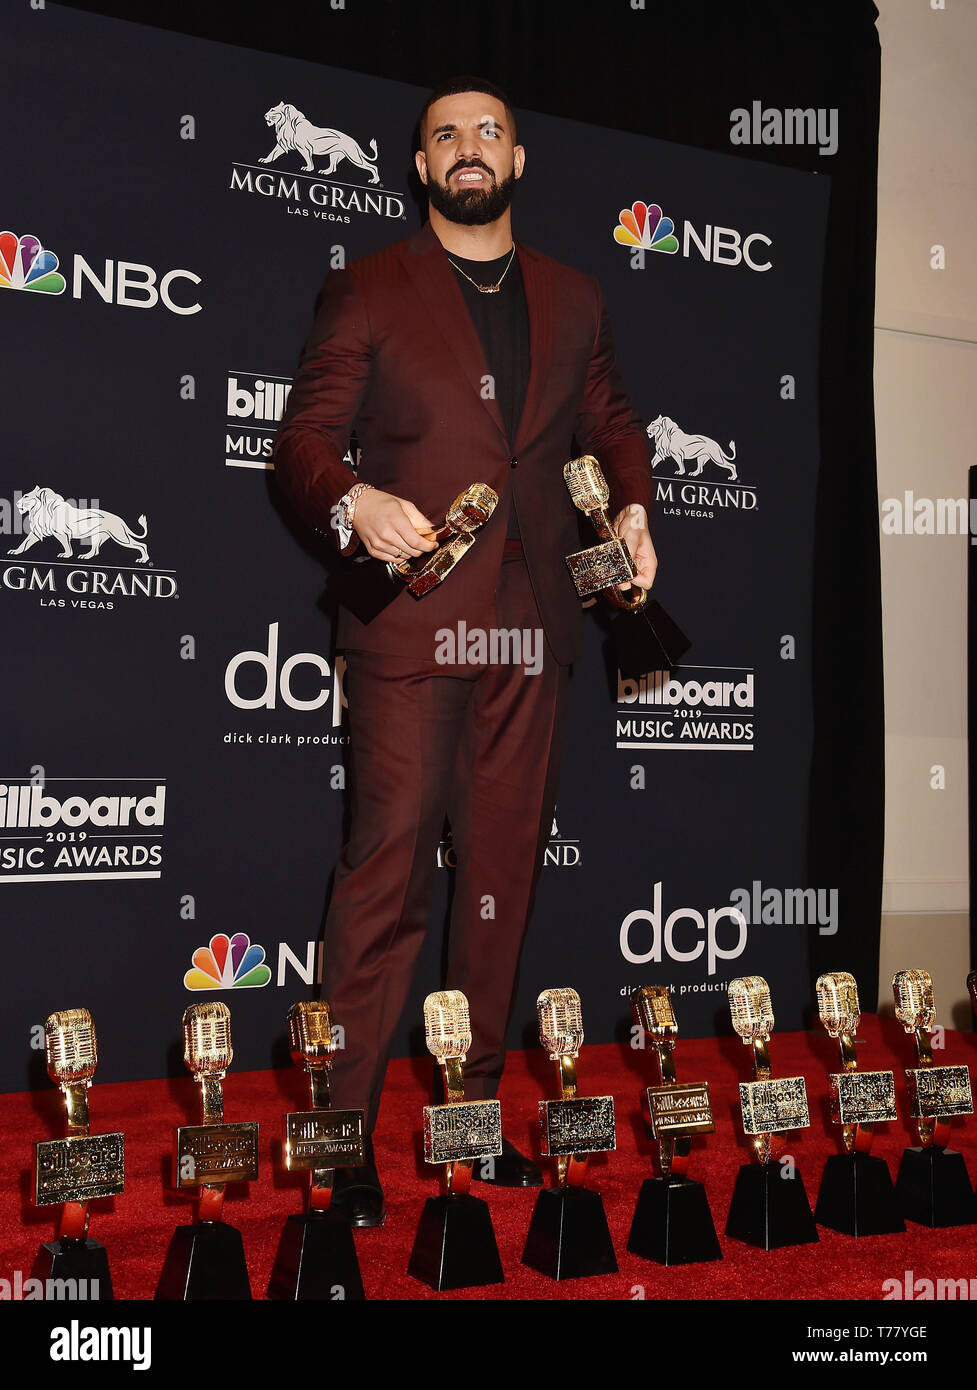 LAS VEGAS, NV - MAY 01: Drake poses with the awards for Top Artist, Top Male Artist, Top Billboard 200 Album for “Scorpion”, Top Billboard 200 Artist, Top Hot 100 Artist, Top Streaming Songs Artist, Top Song Sales Artist, Top Rap Artist, Top Rap Male Artist in the press room during the 2019 Billboard Music Awards at MGM Grand Garden Arena on May 01, 2019 in Las Vegas, Nevada. Stock Photo